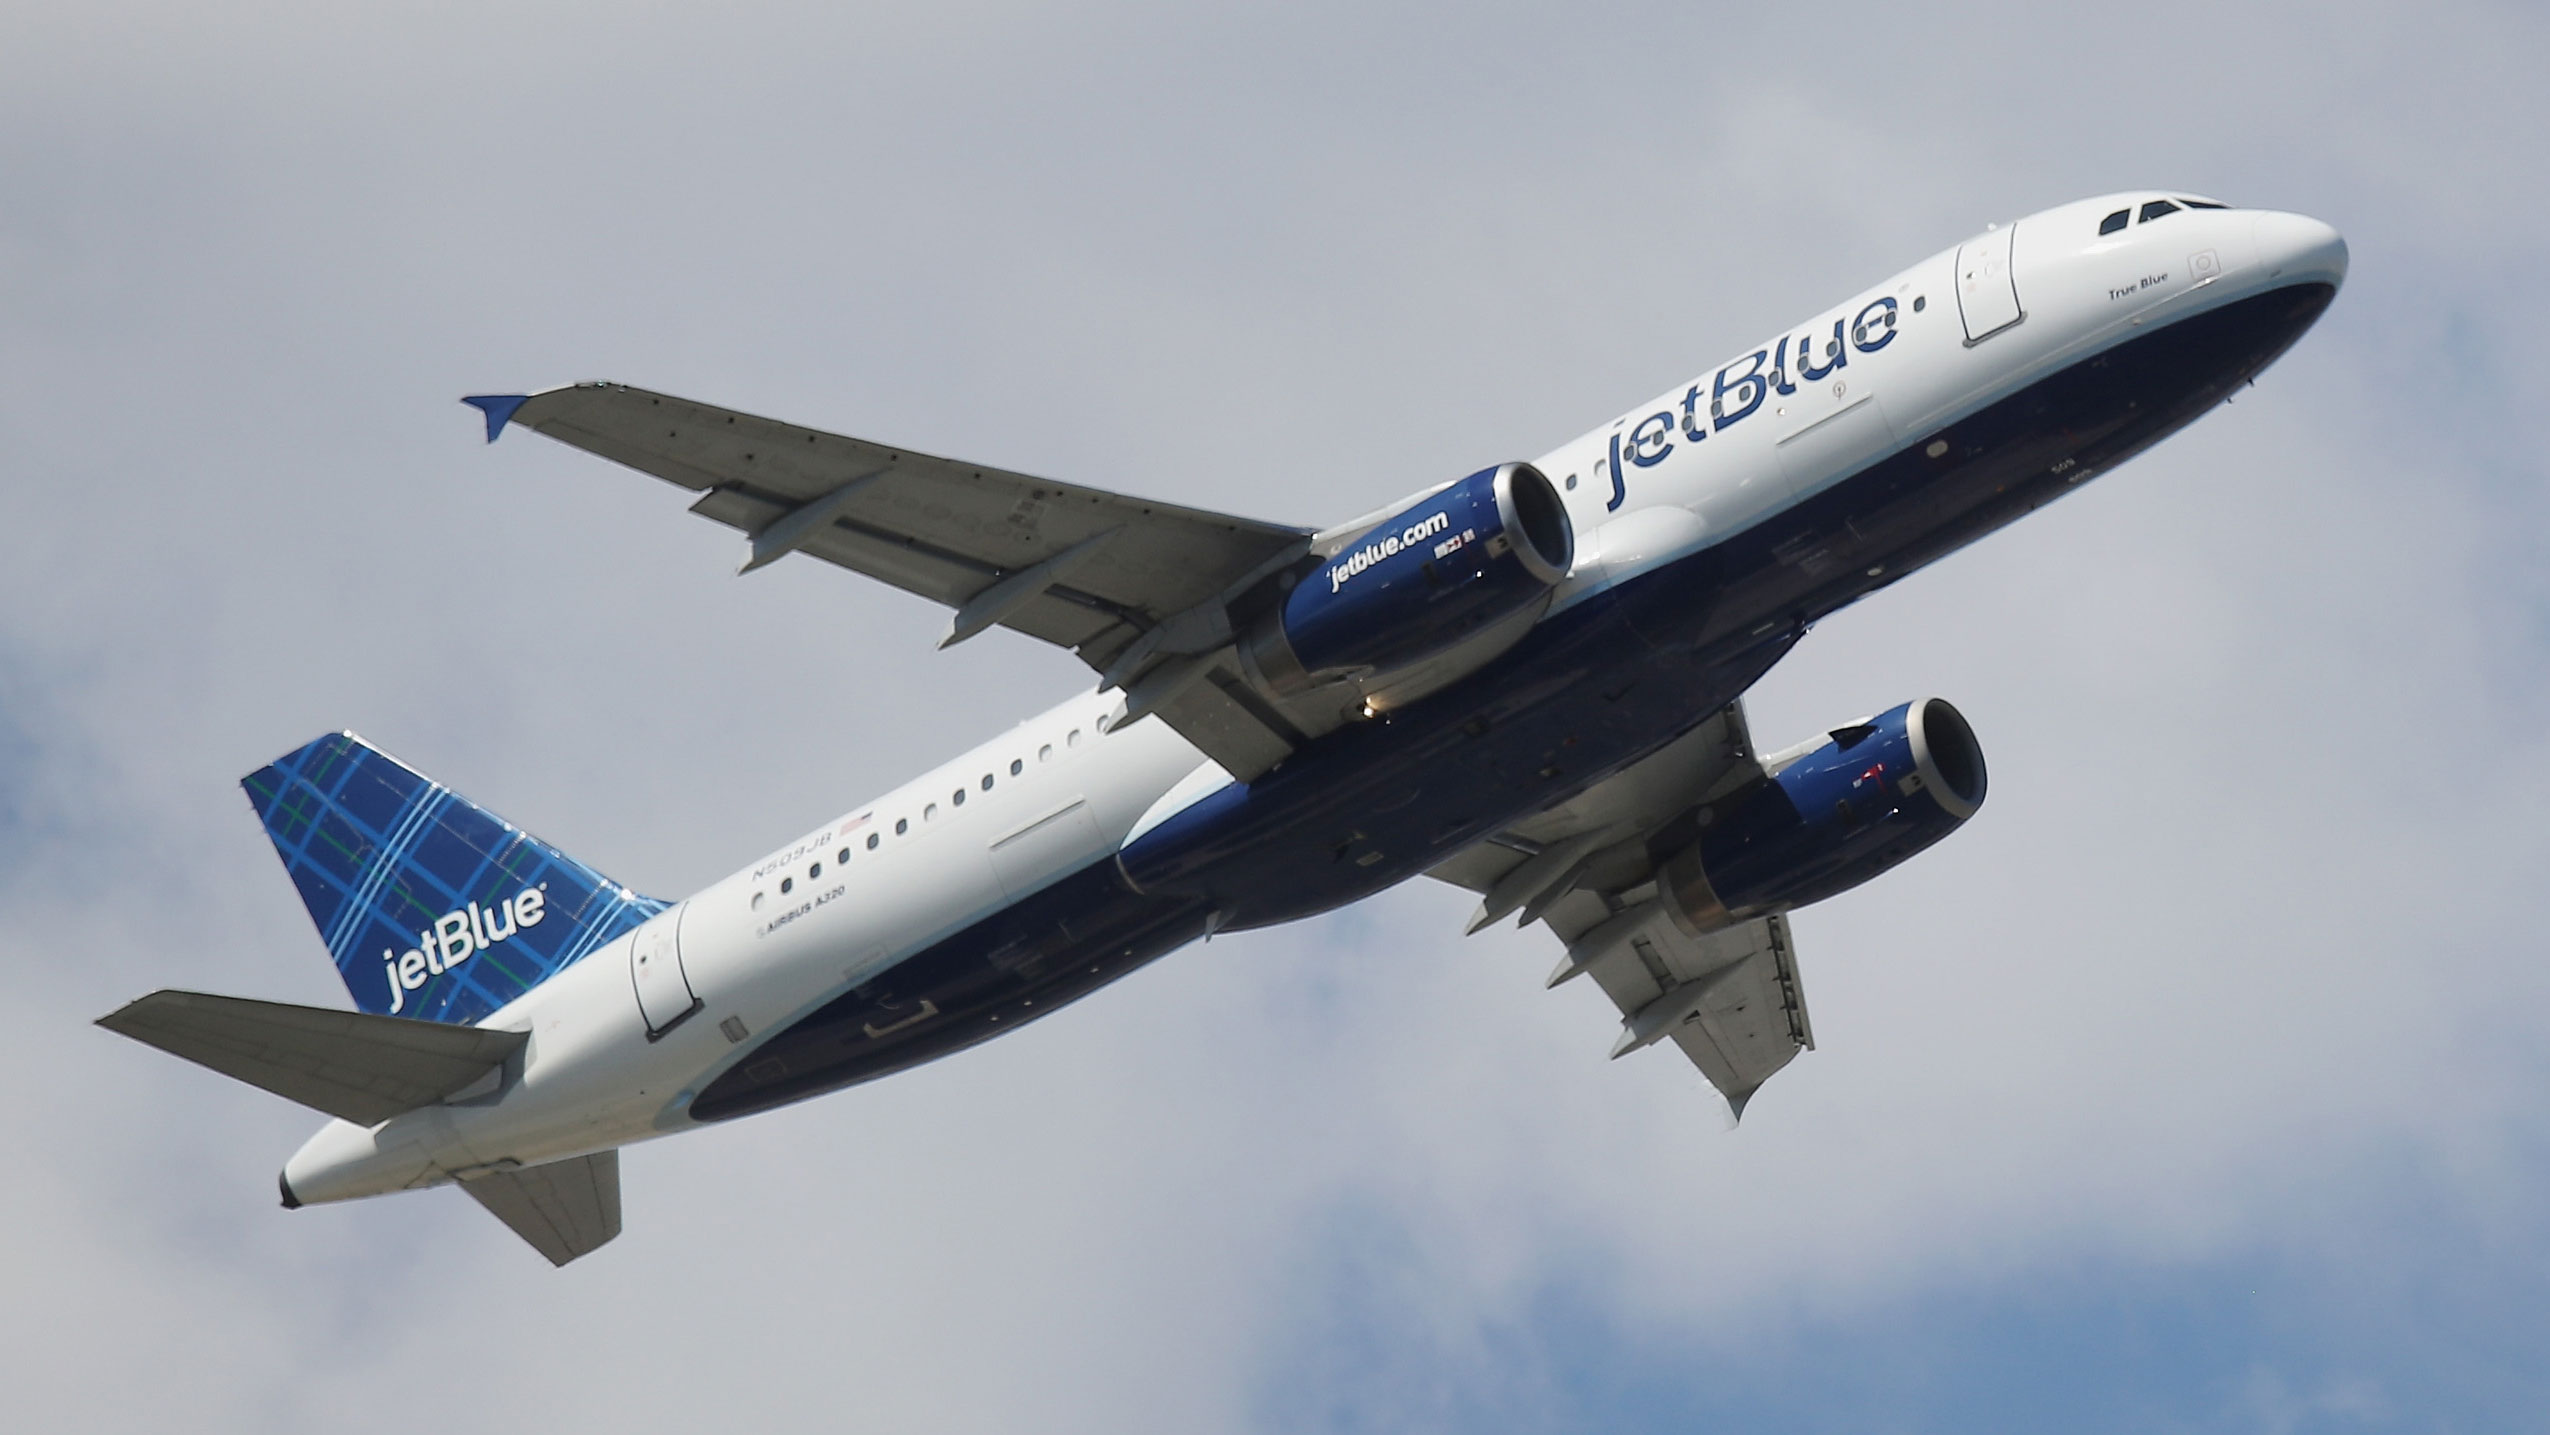 JetBlue has modeled its policy on CDC guidelines that indicate all individuals should wear a face covering in public to help slow the spread of the coronavirus.